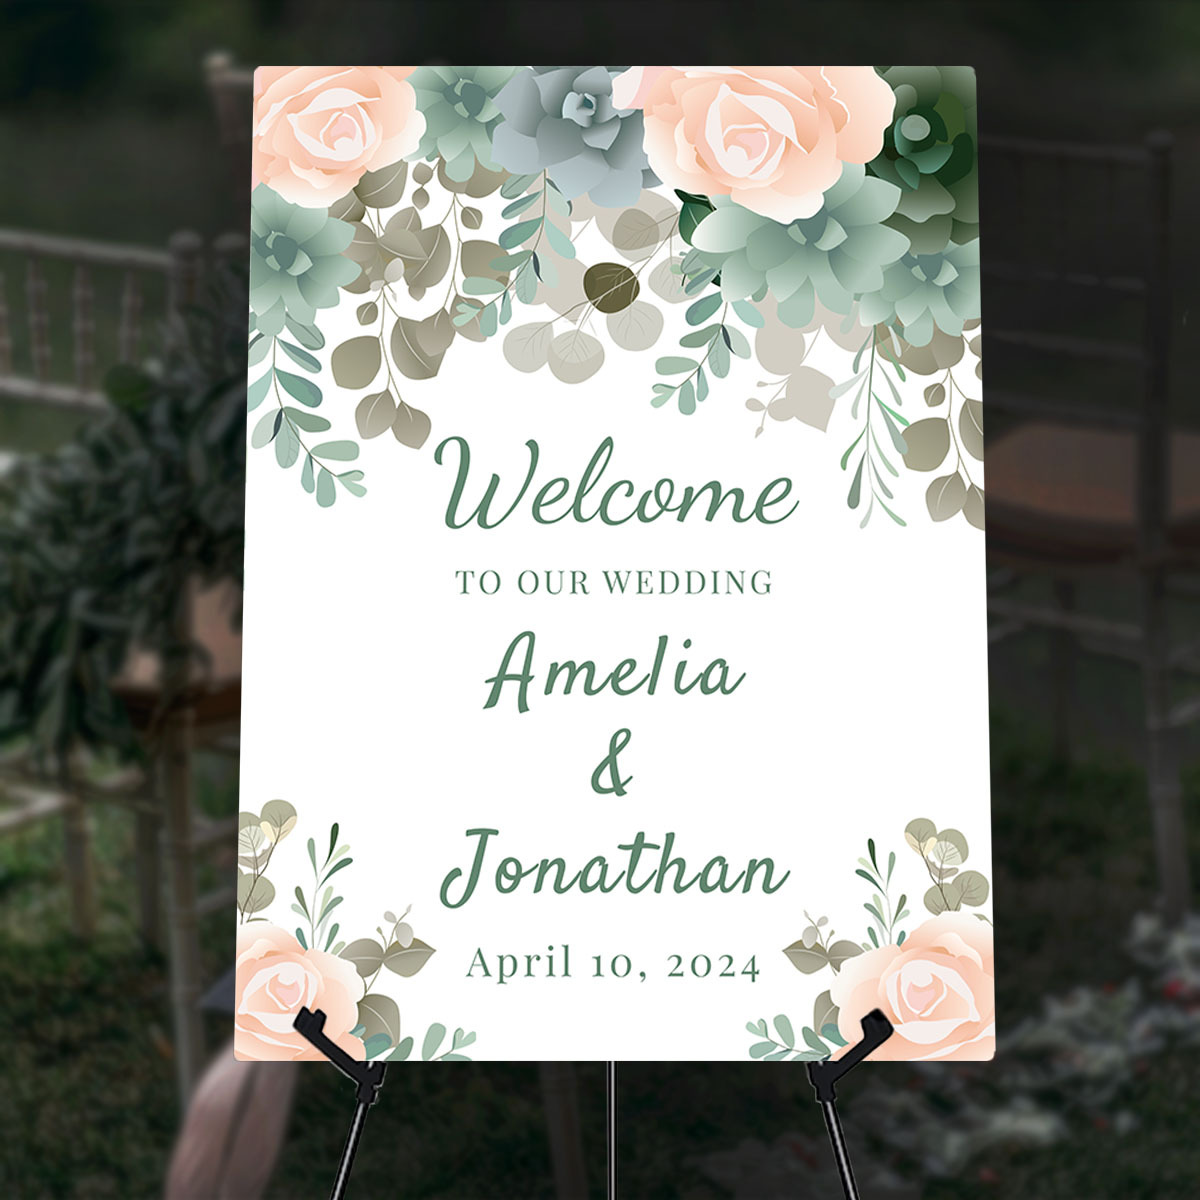 

Customized Wedding Welcome Sign With Heart Theme - Durable Plastic, Universal Holiday Decor, Stake-mounted, Electricity-free Outdoor Decoration For All Seasons